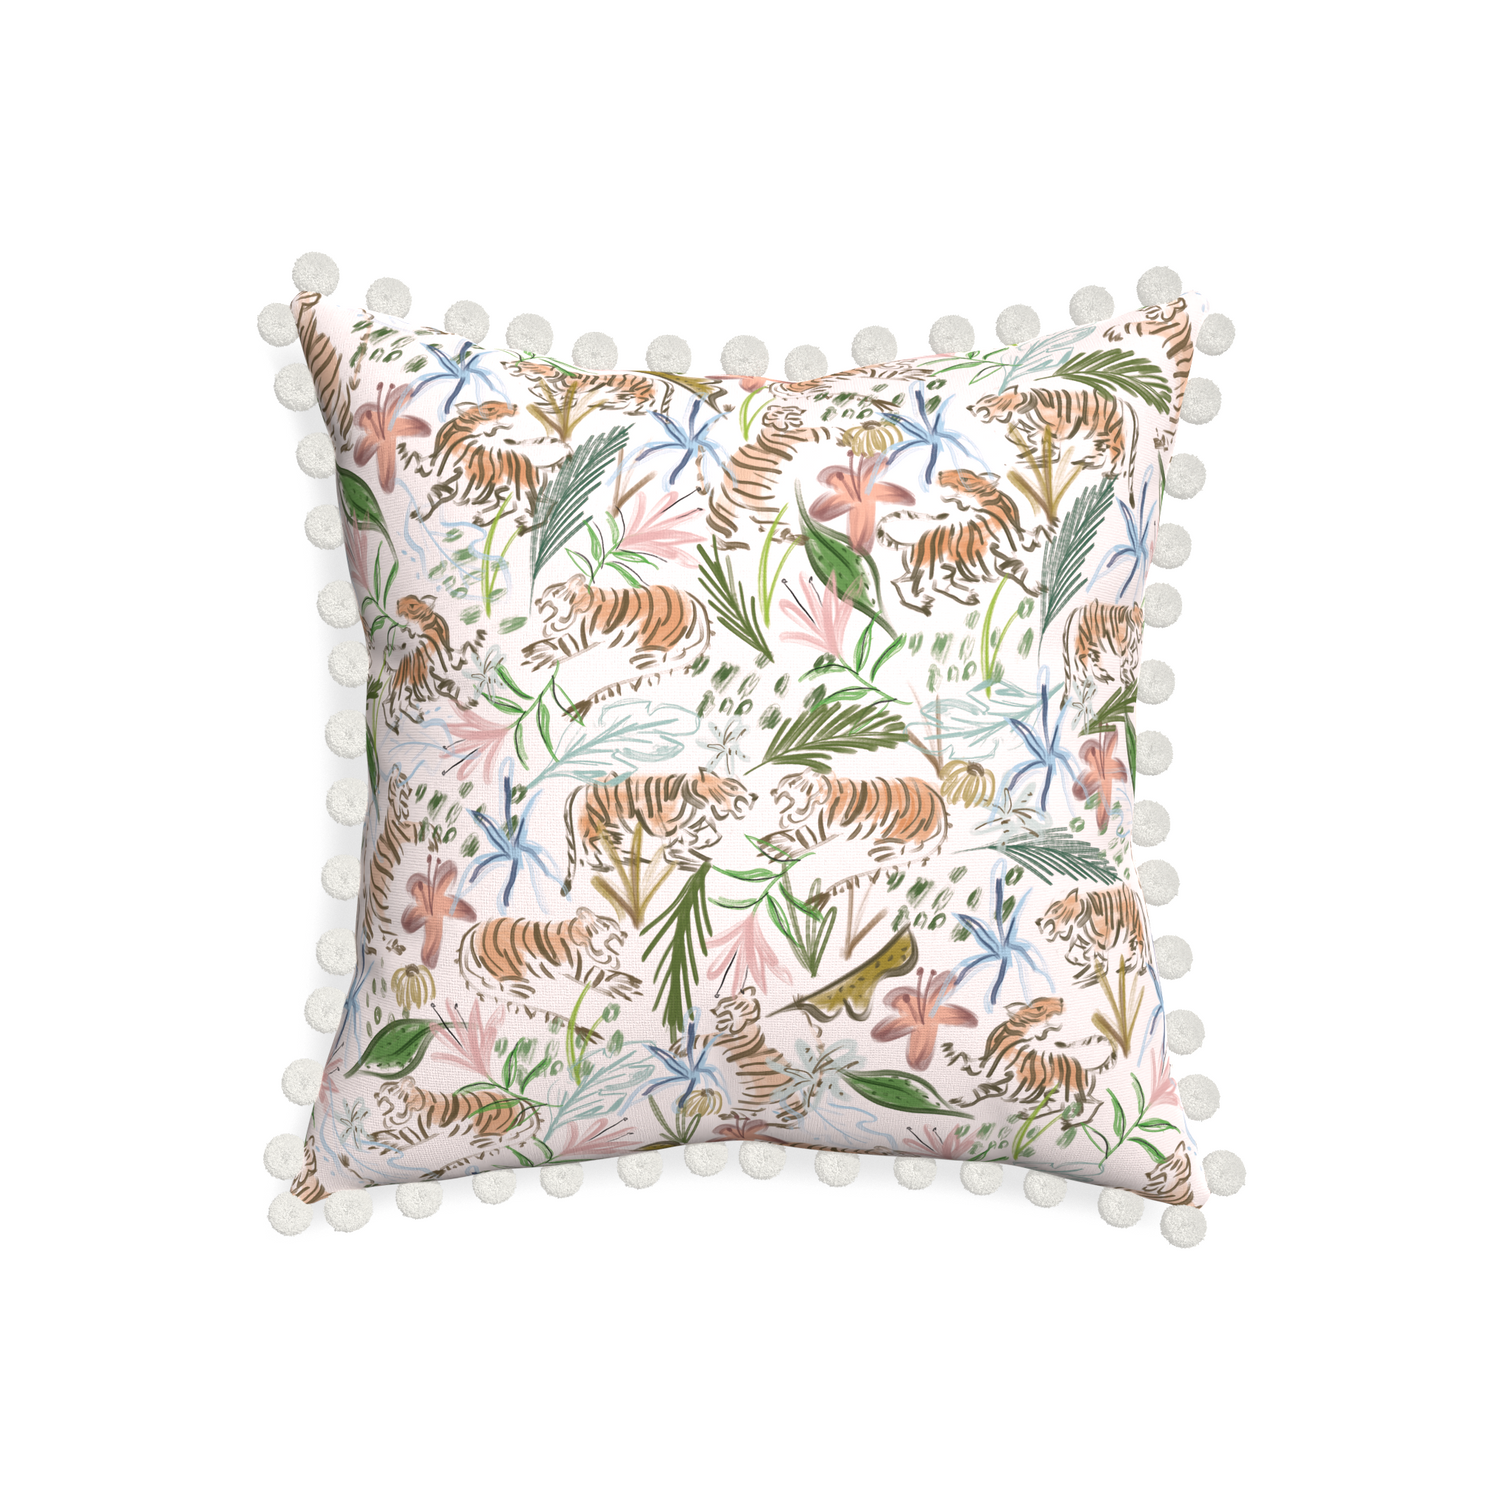 20-square frida pink custom pink chinoiserie tigerpillow with snow pom pom on white background